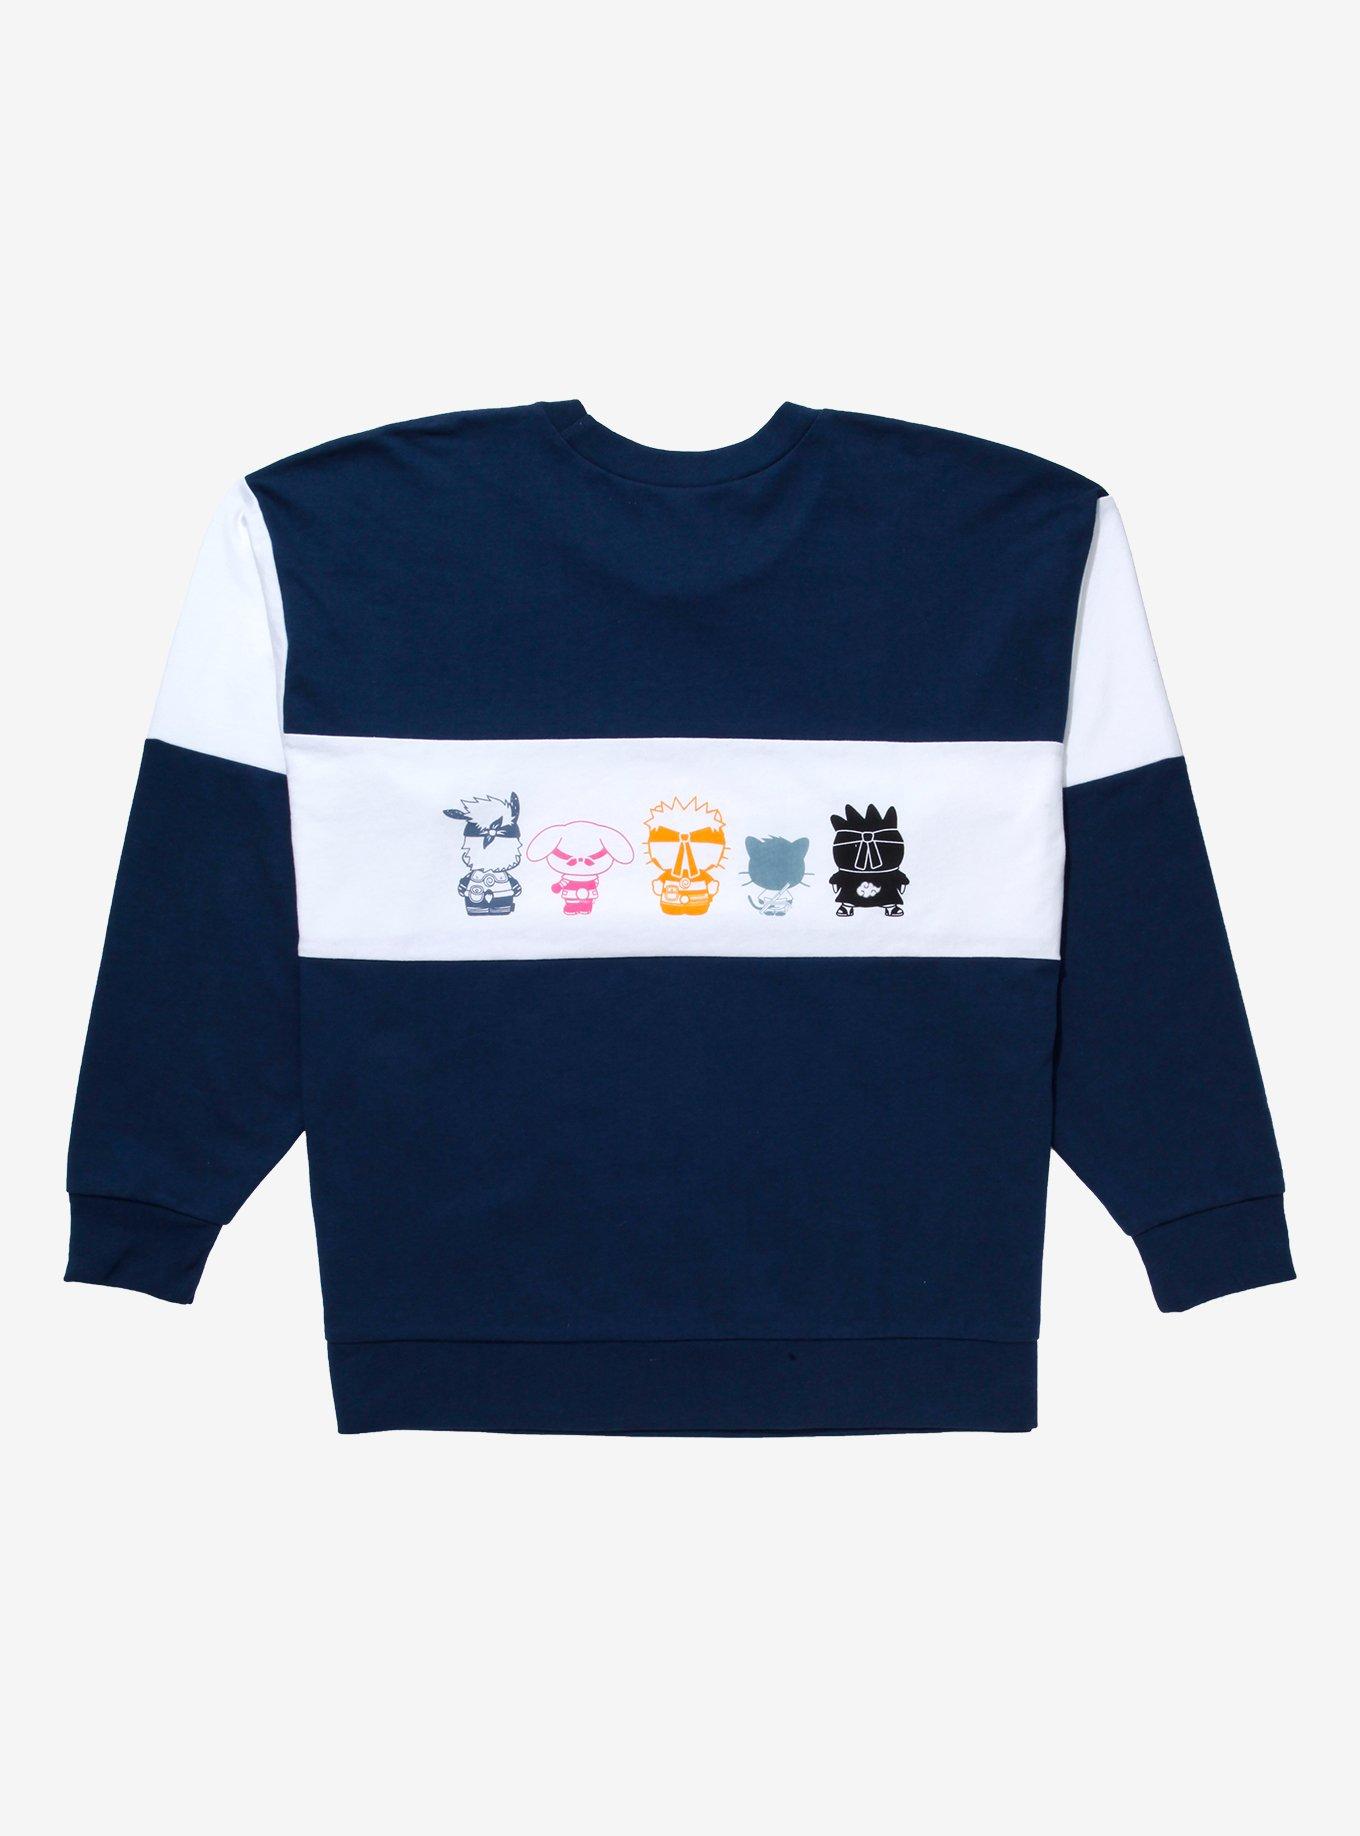 Naruto Shippuden x Hello Kitty and Friends Panel Women's Crewneck - BoxLunch Exclusive, NAVY, alternate